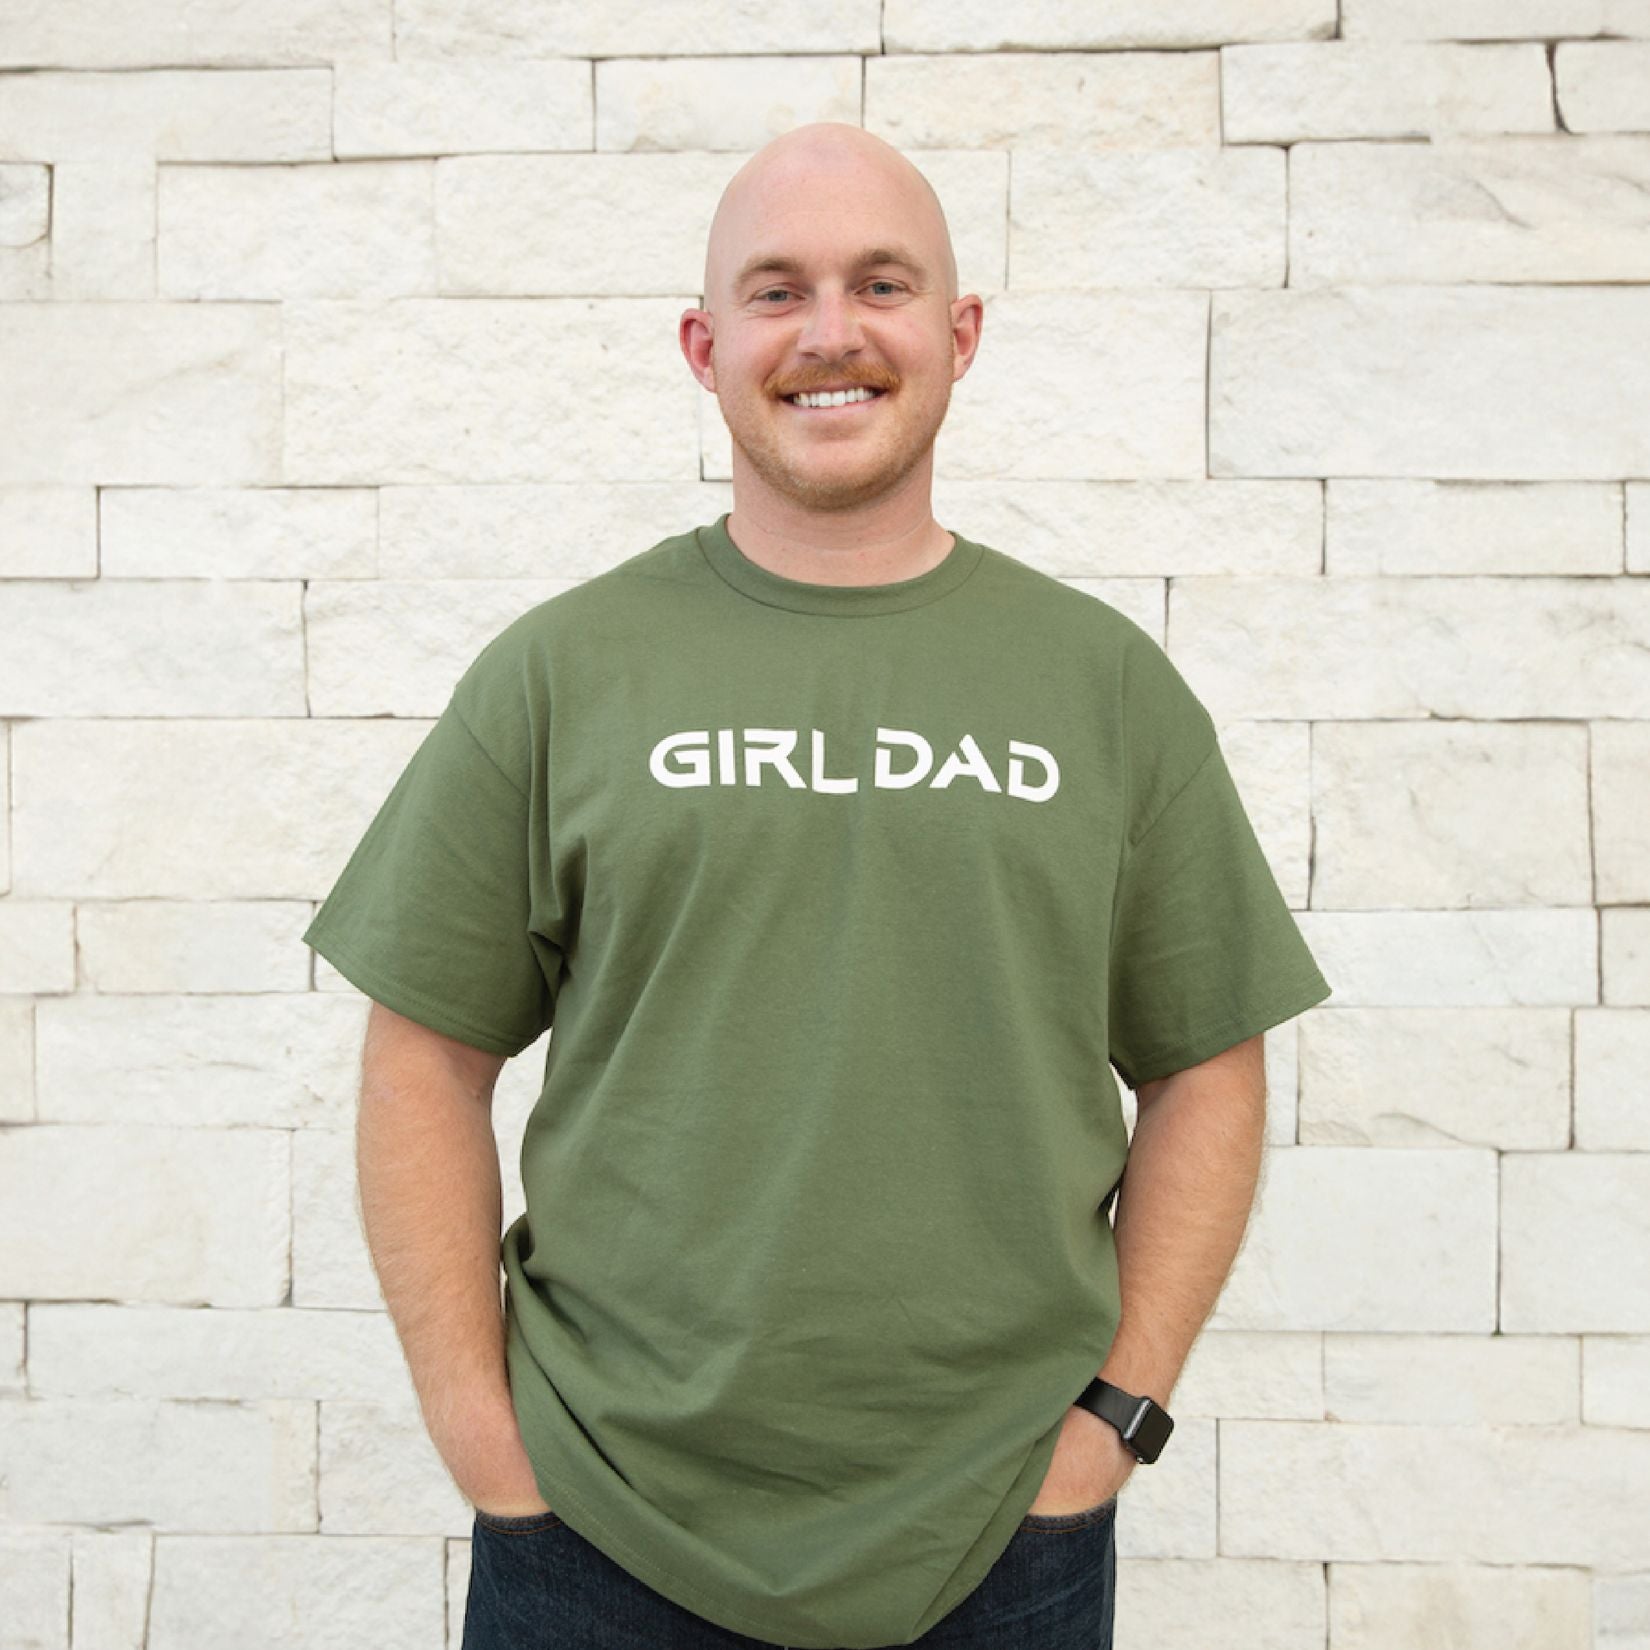 Dad wearing The Baby Cubby Girl Dad Tee Shirt - Military Green